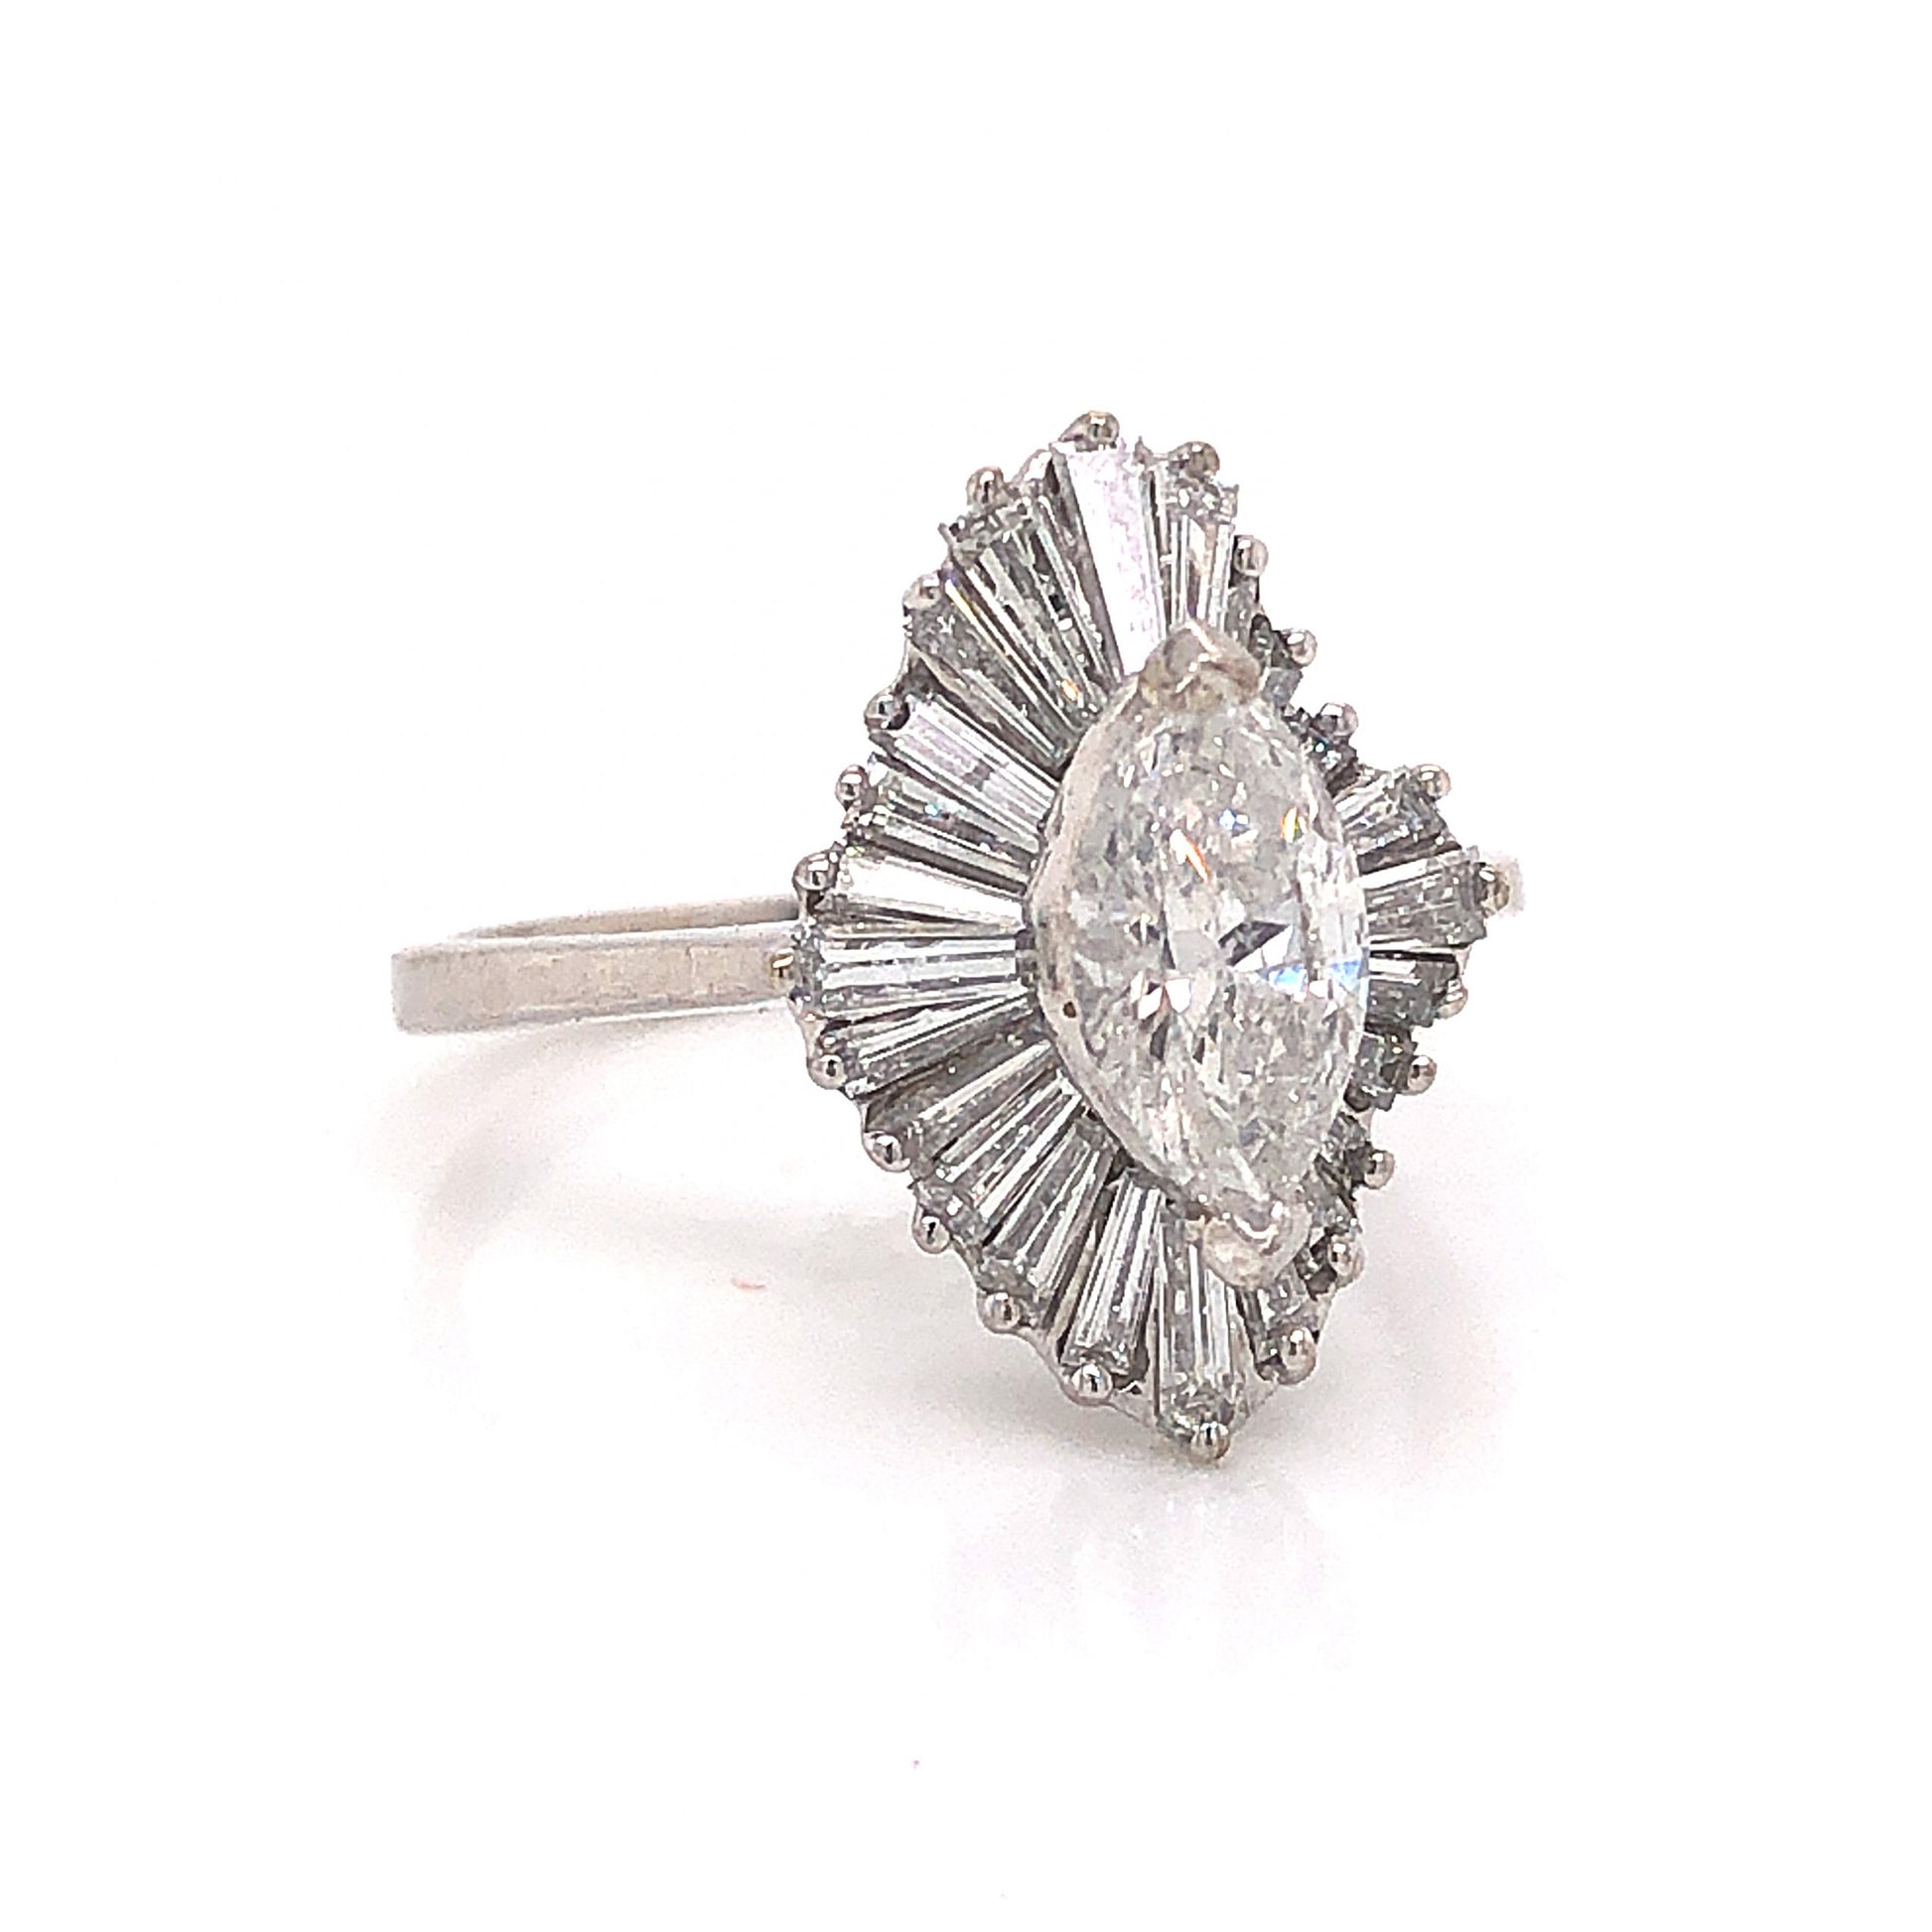 Marquise Diamond Ballerina Halo Engagement Ring in 18k White GoldComposition: 18 Karat White Gold Ring Size: 6.25 Total Diamond Weight: 1.92ct Total Gram Weight: 3.7 g Inscription: 18k
      